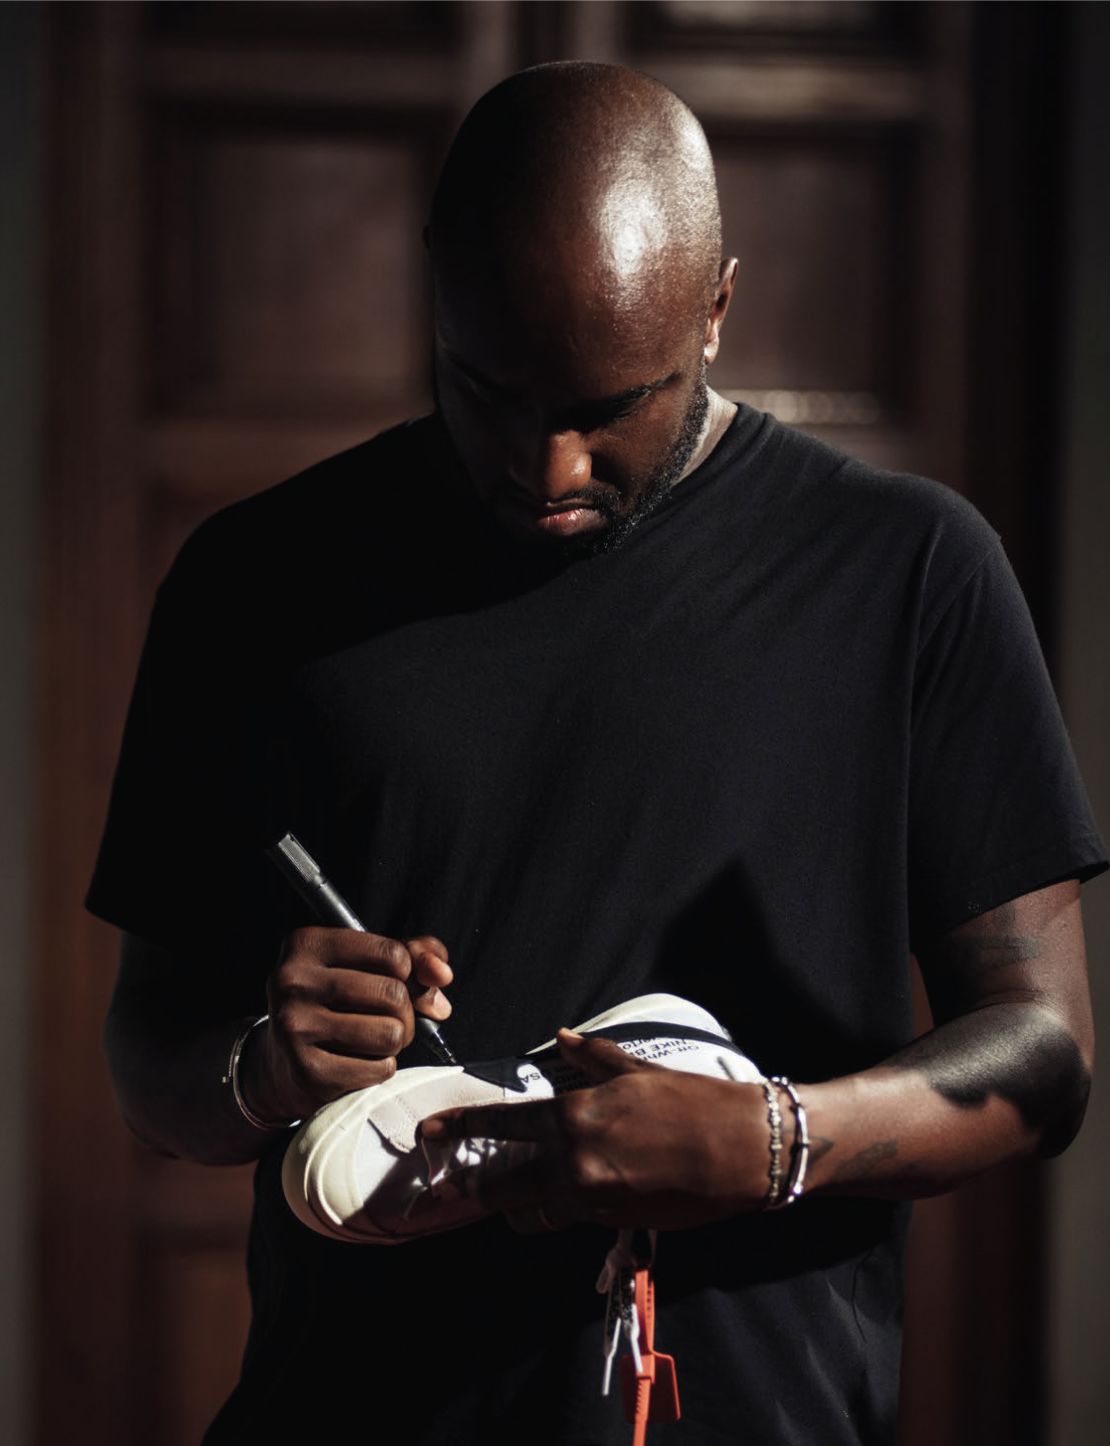 Virgil Abloh signs a shoe designed by his fashion brand, Off-White, in collaboration with Nike. 